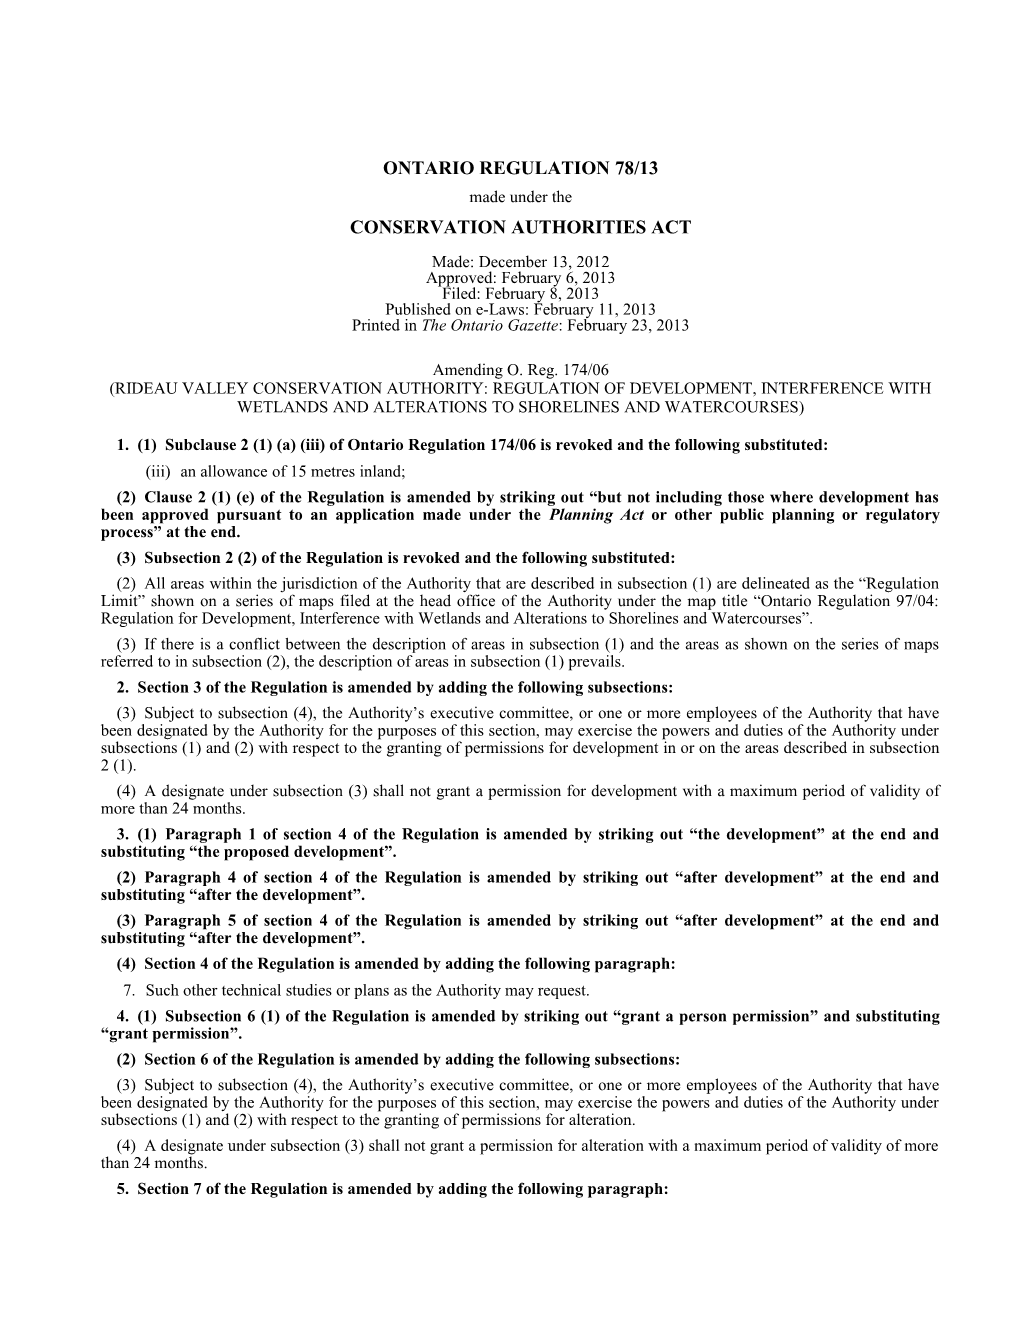 CONSERVATION AUTHORITIES ACT - O. Reg. 78/13